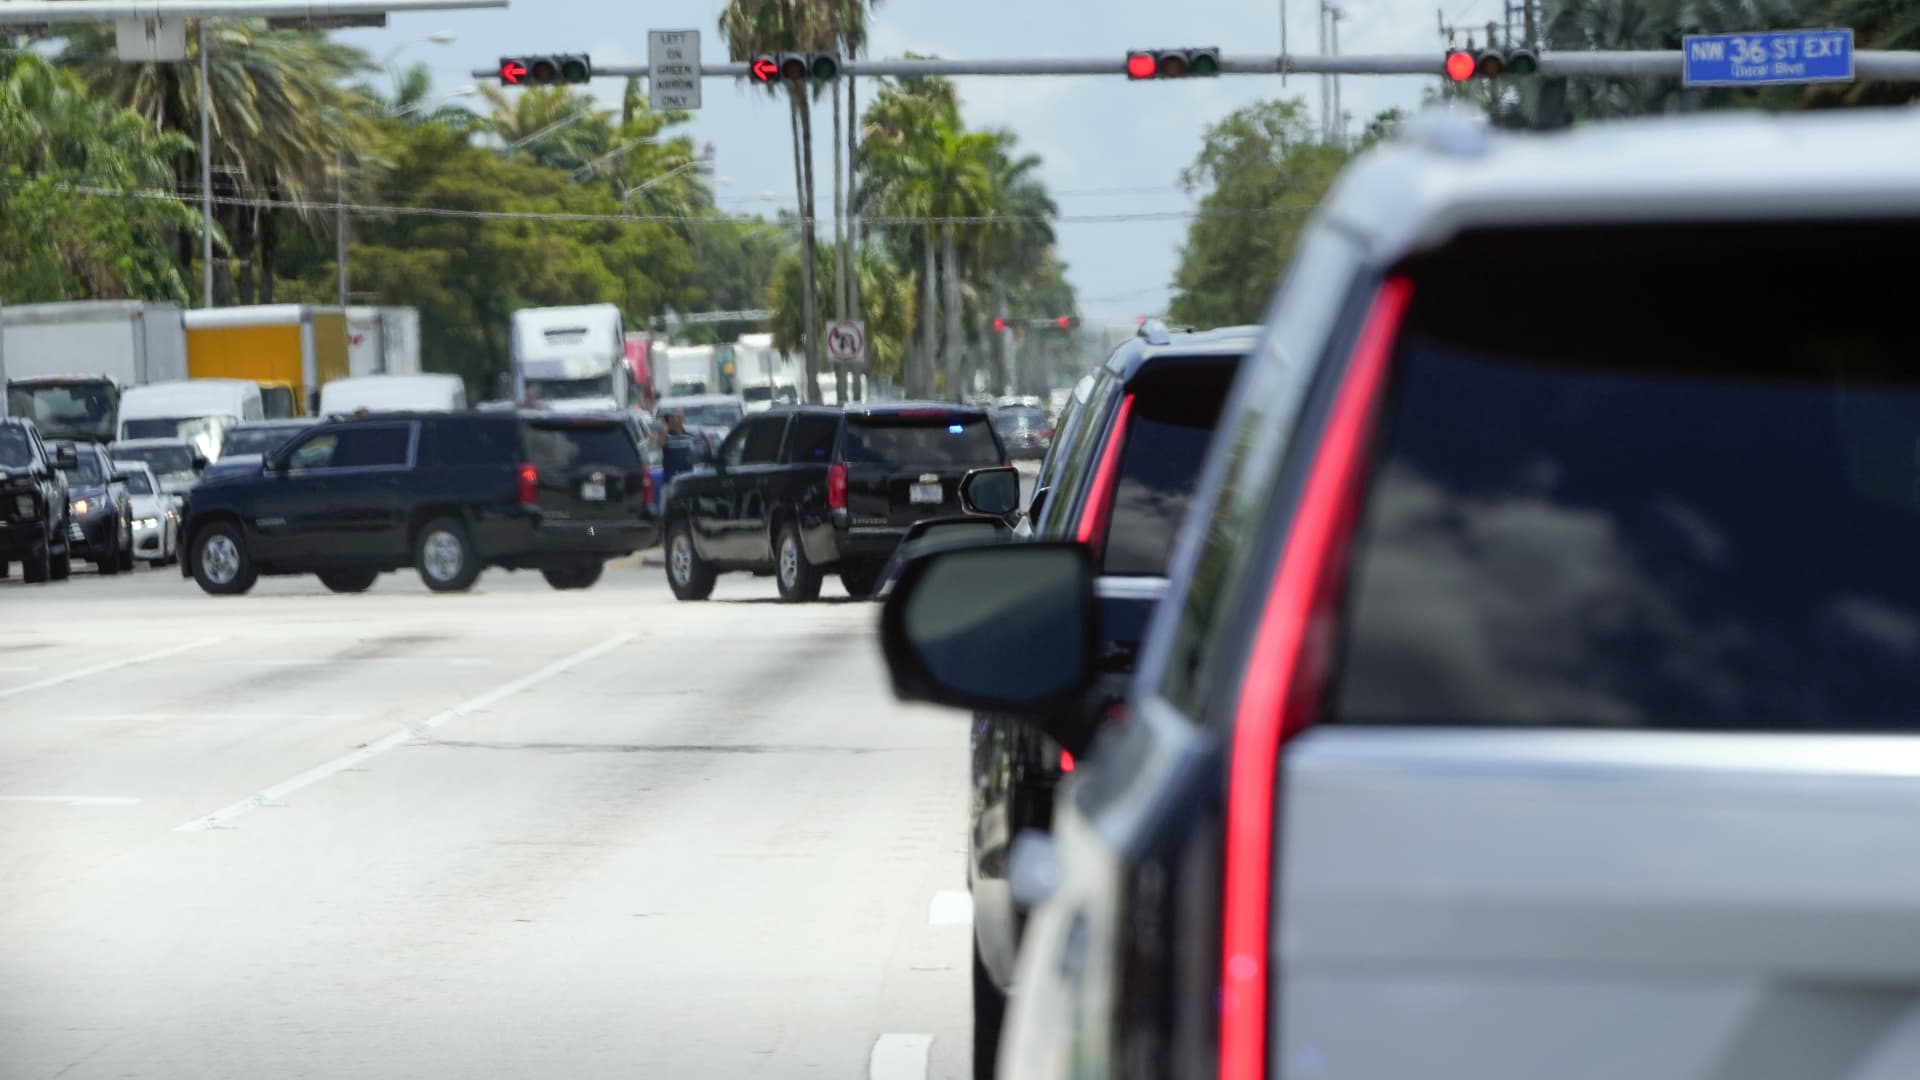 The motorcade for former President Donald Trump leaves Trump National Doral resort on Tuesday, June 13, 2023, in Doral Fla.